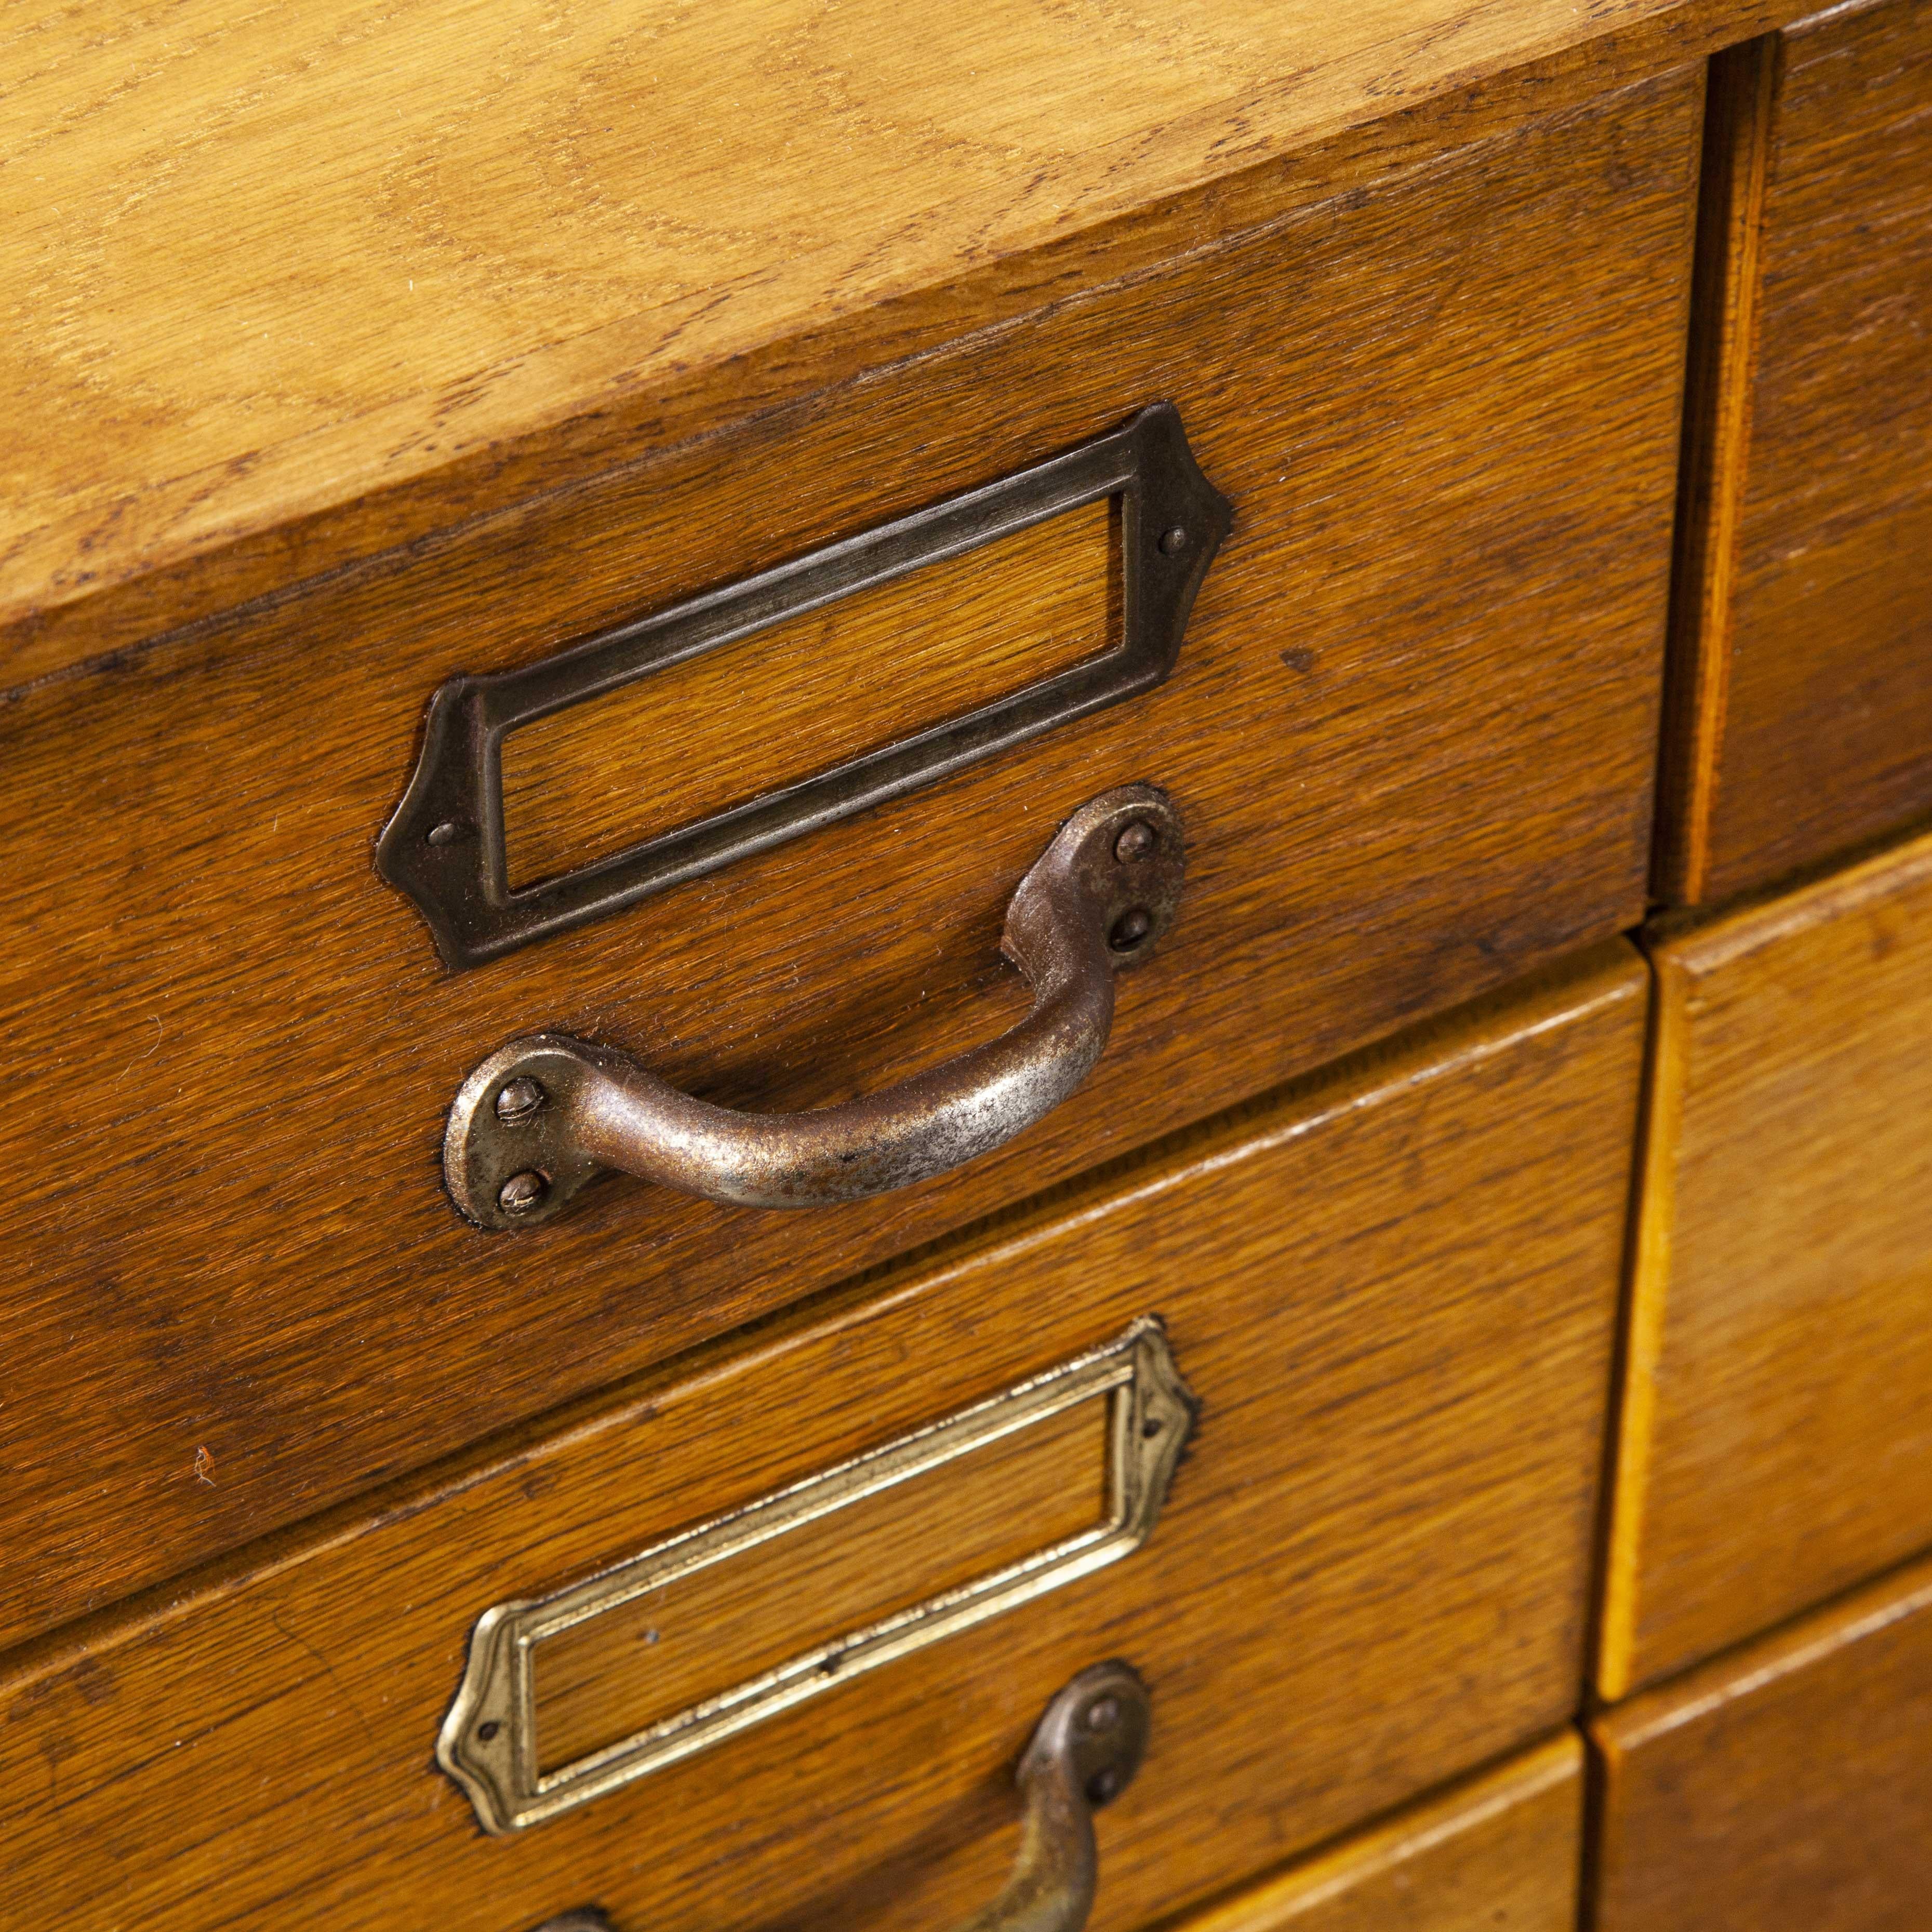 1950s tall multi drawer chest of drawers – storage cabinet – forty eight drawers

1950s tall multi drawer chest of drawers – storage cabinet. With forty eight drawers this is a stunning practical chest. Sourced from a German bank this was